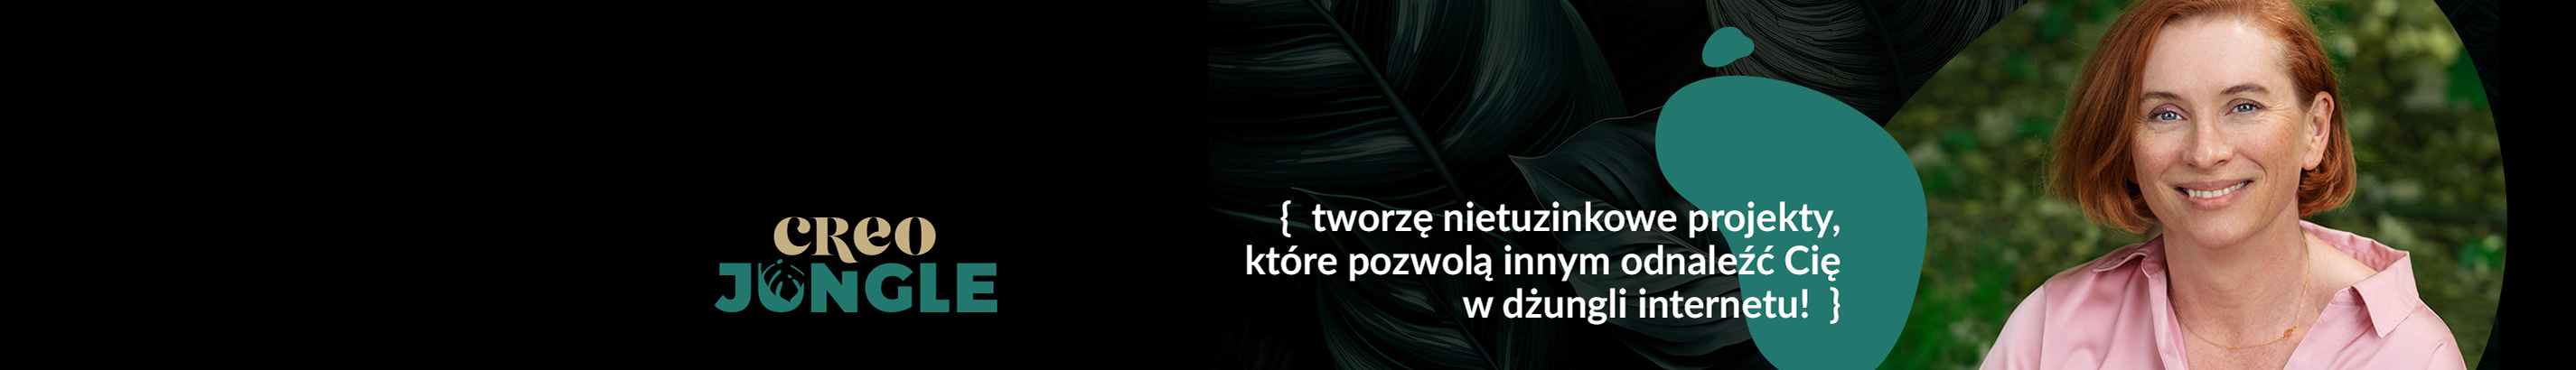 Sylwia Sitkiewicz's profile banner